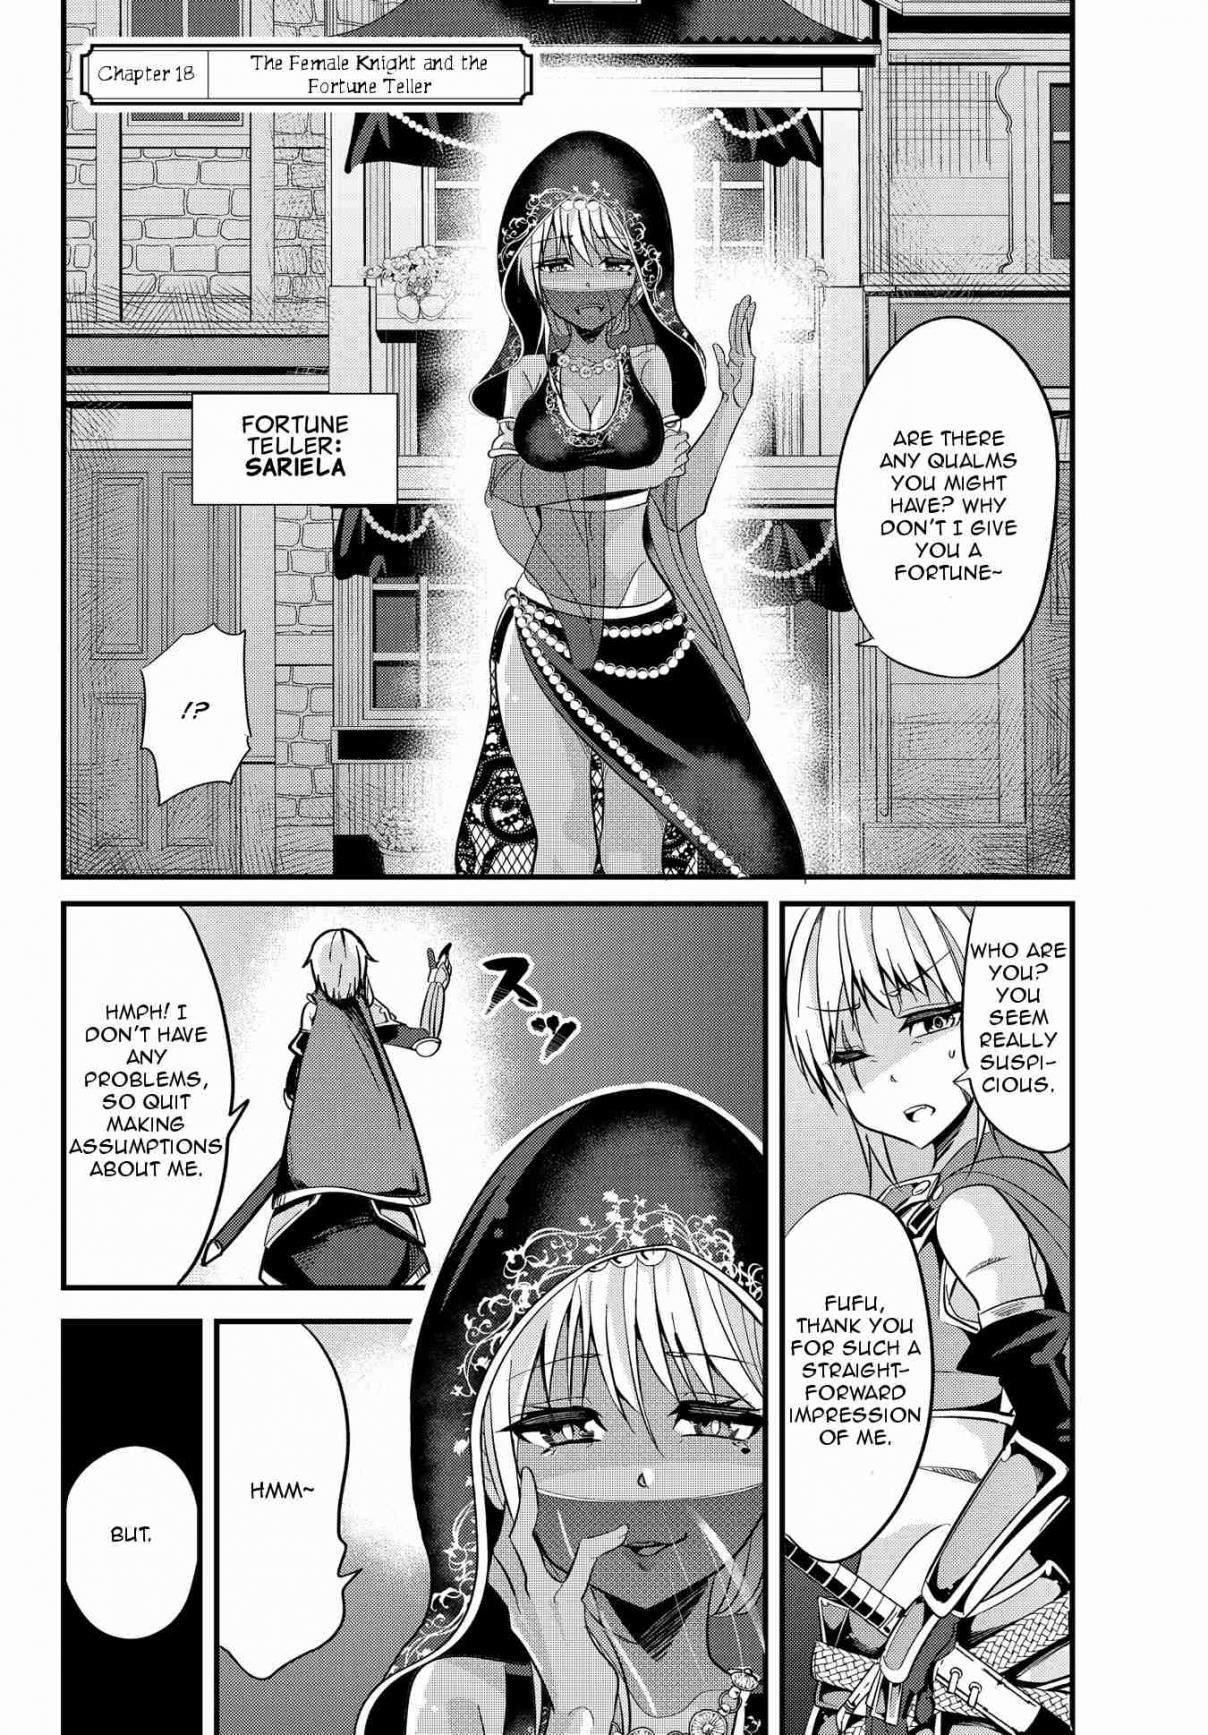 A Story About Treating a Female Knight, Who Has Never Been Treated as a Woman, as a Woman Ch. 18 The Female Knight and the Fortune Teller